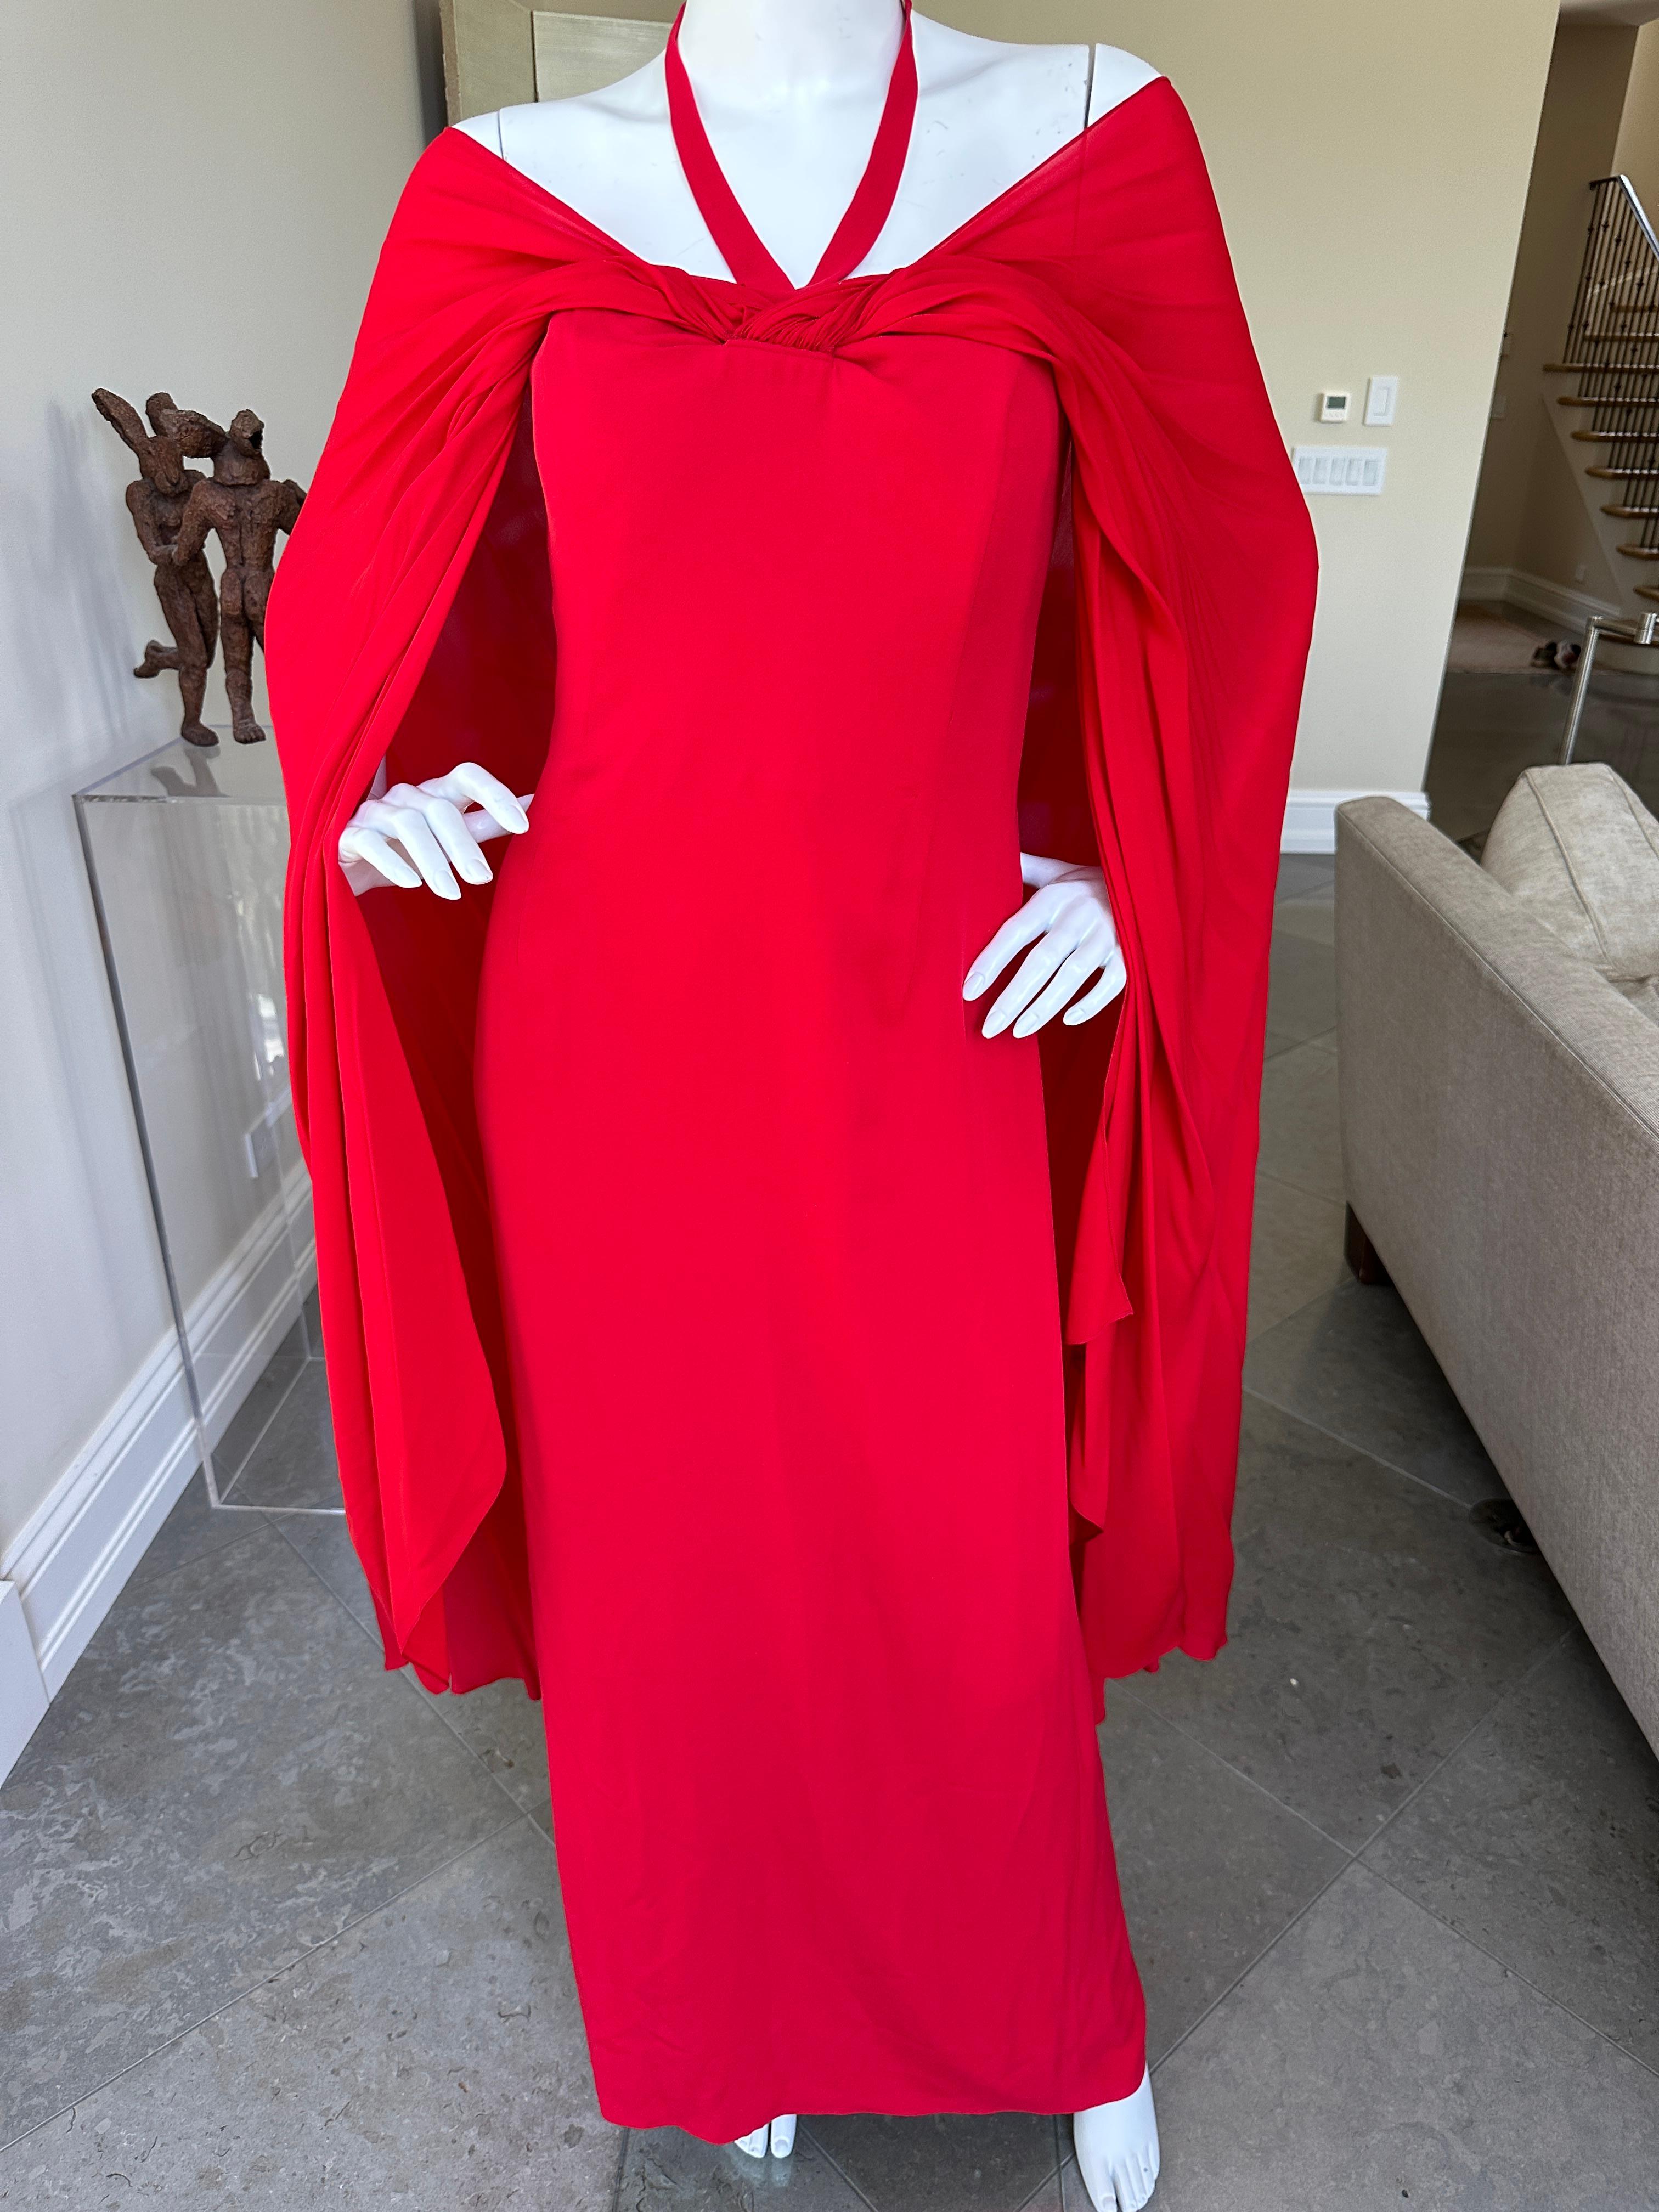 Bill Blass Vintage 1980's Red Silk Evening Dress with Attached Cape.
This is exquisite , it is strapless with an attached large flange of  fabric attached at the bust.
There is an inner corset.
I am not certain how it was originally styled, but I